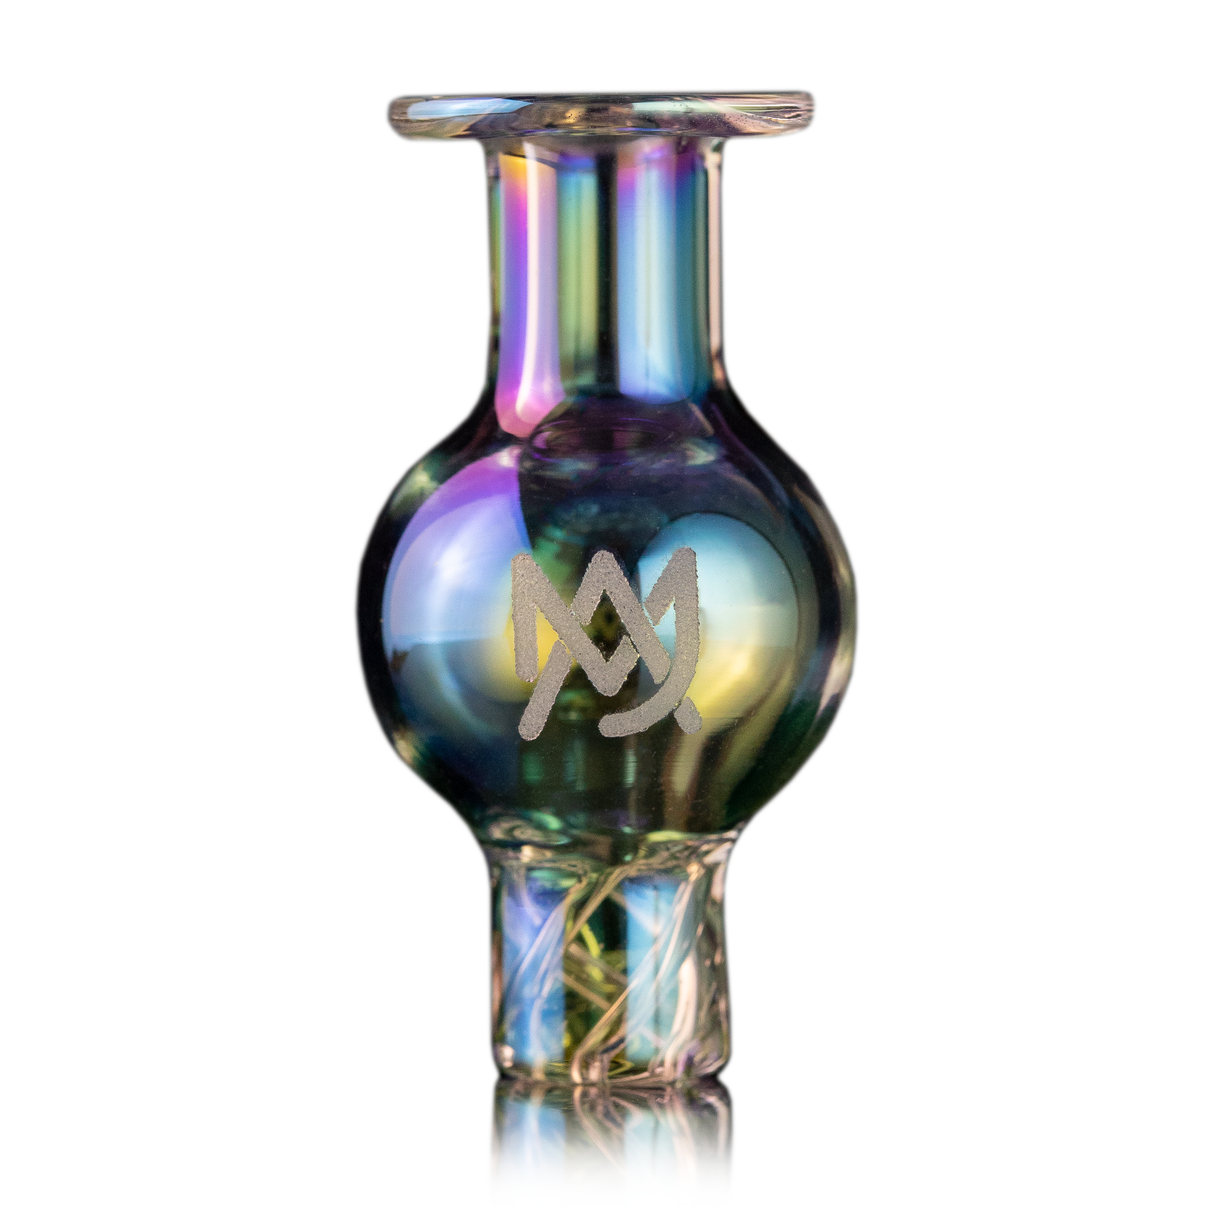 MJ Arsenal Iridescent Spinner Carb Cap for Dab Rigs - Front View on White Background